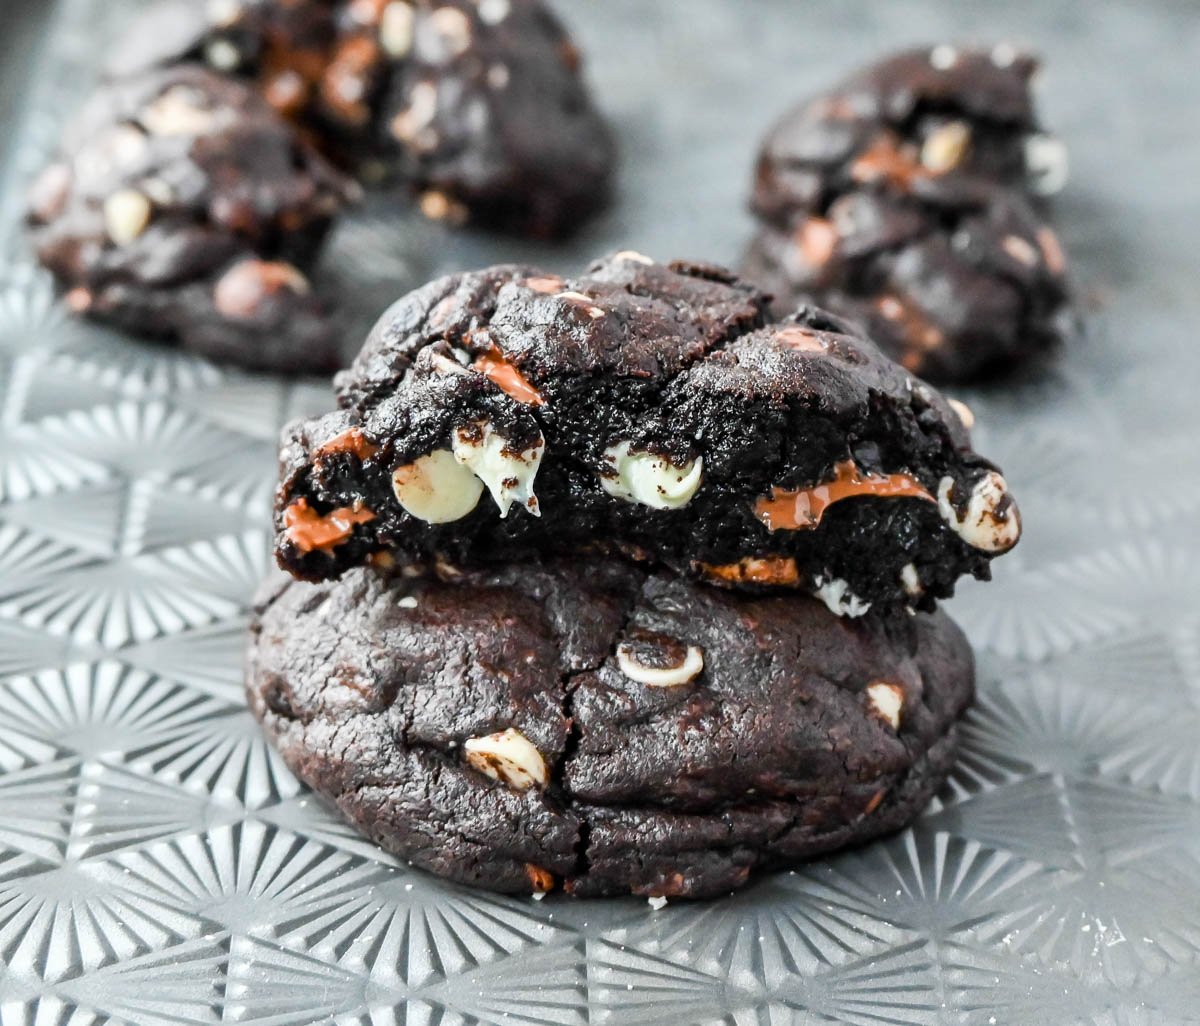 This Levain Bakery Black and White Cookie is a soft, thick, and chewy dark chocolate cookie with white chocolate and milk chocolate chips. It is a bakery-style triple chocolate chip cookie recipe for chocolate lovers!